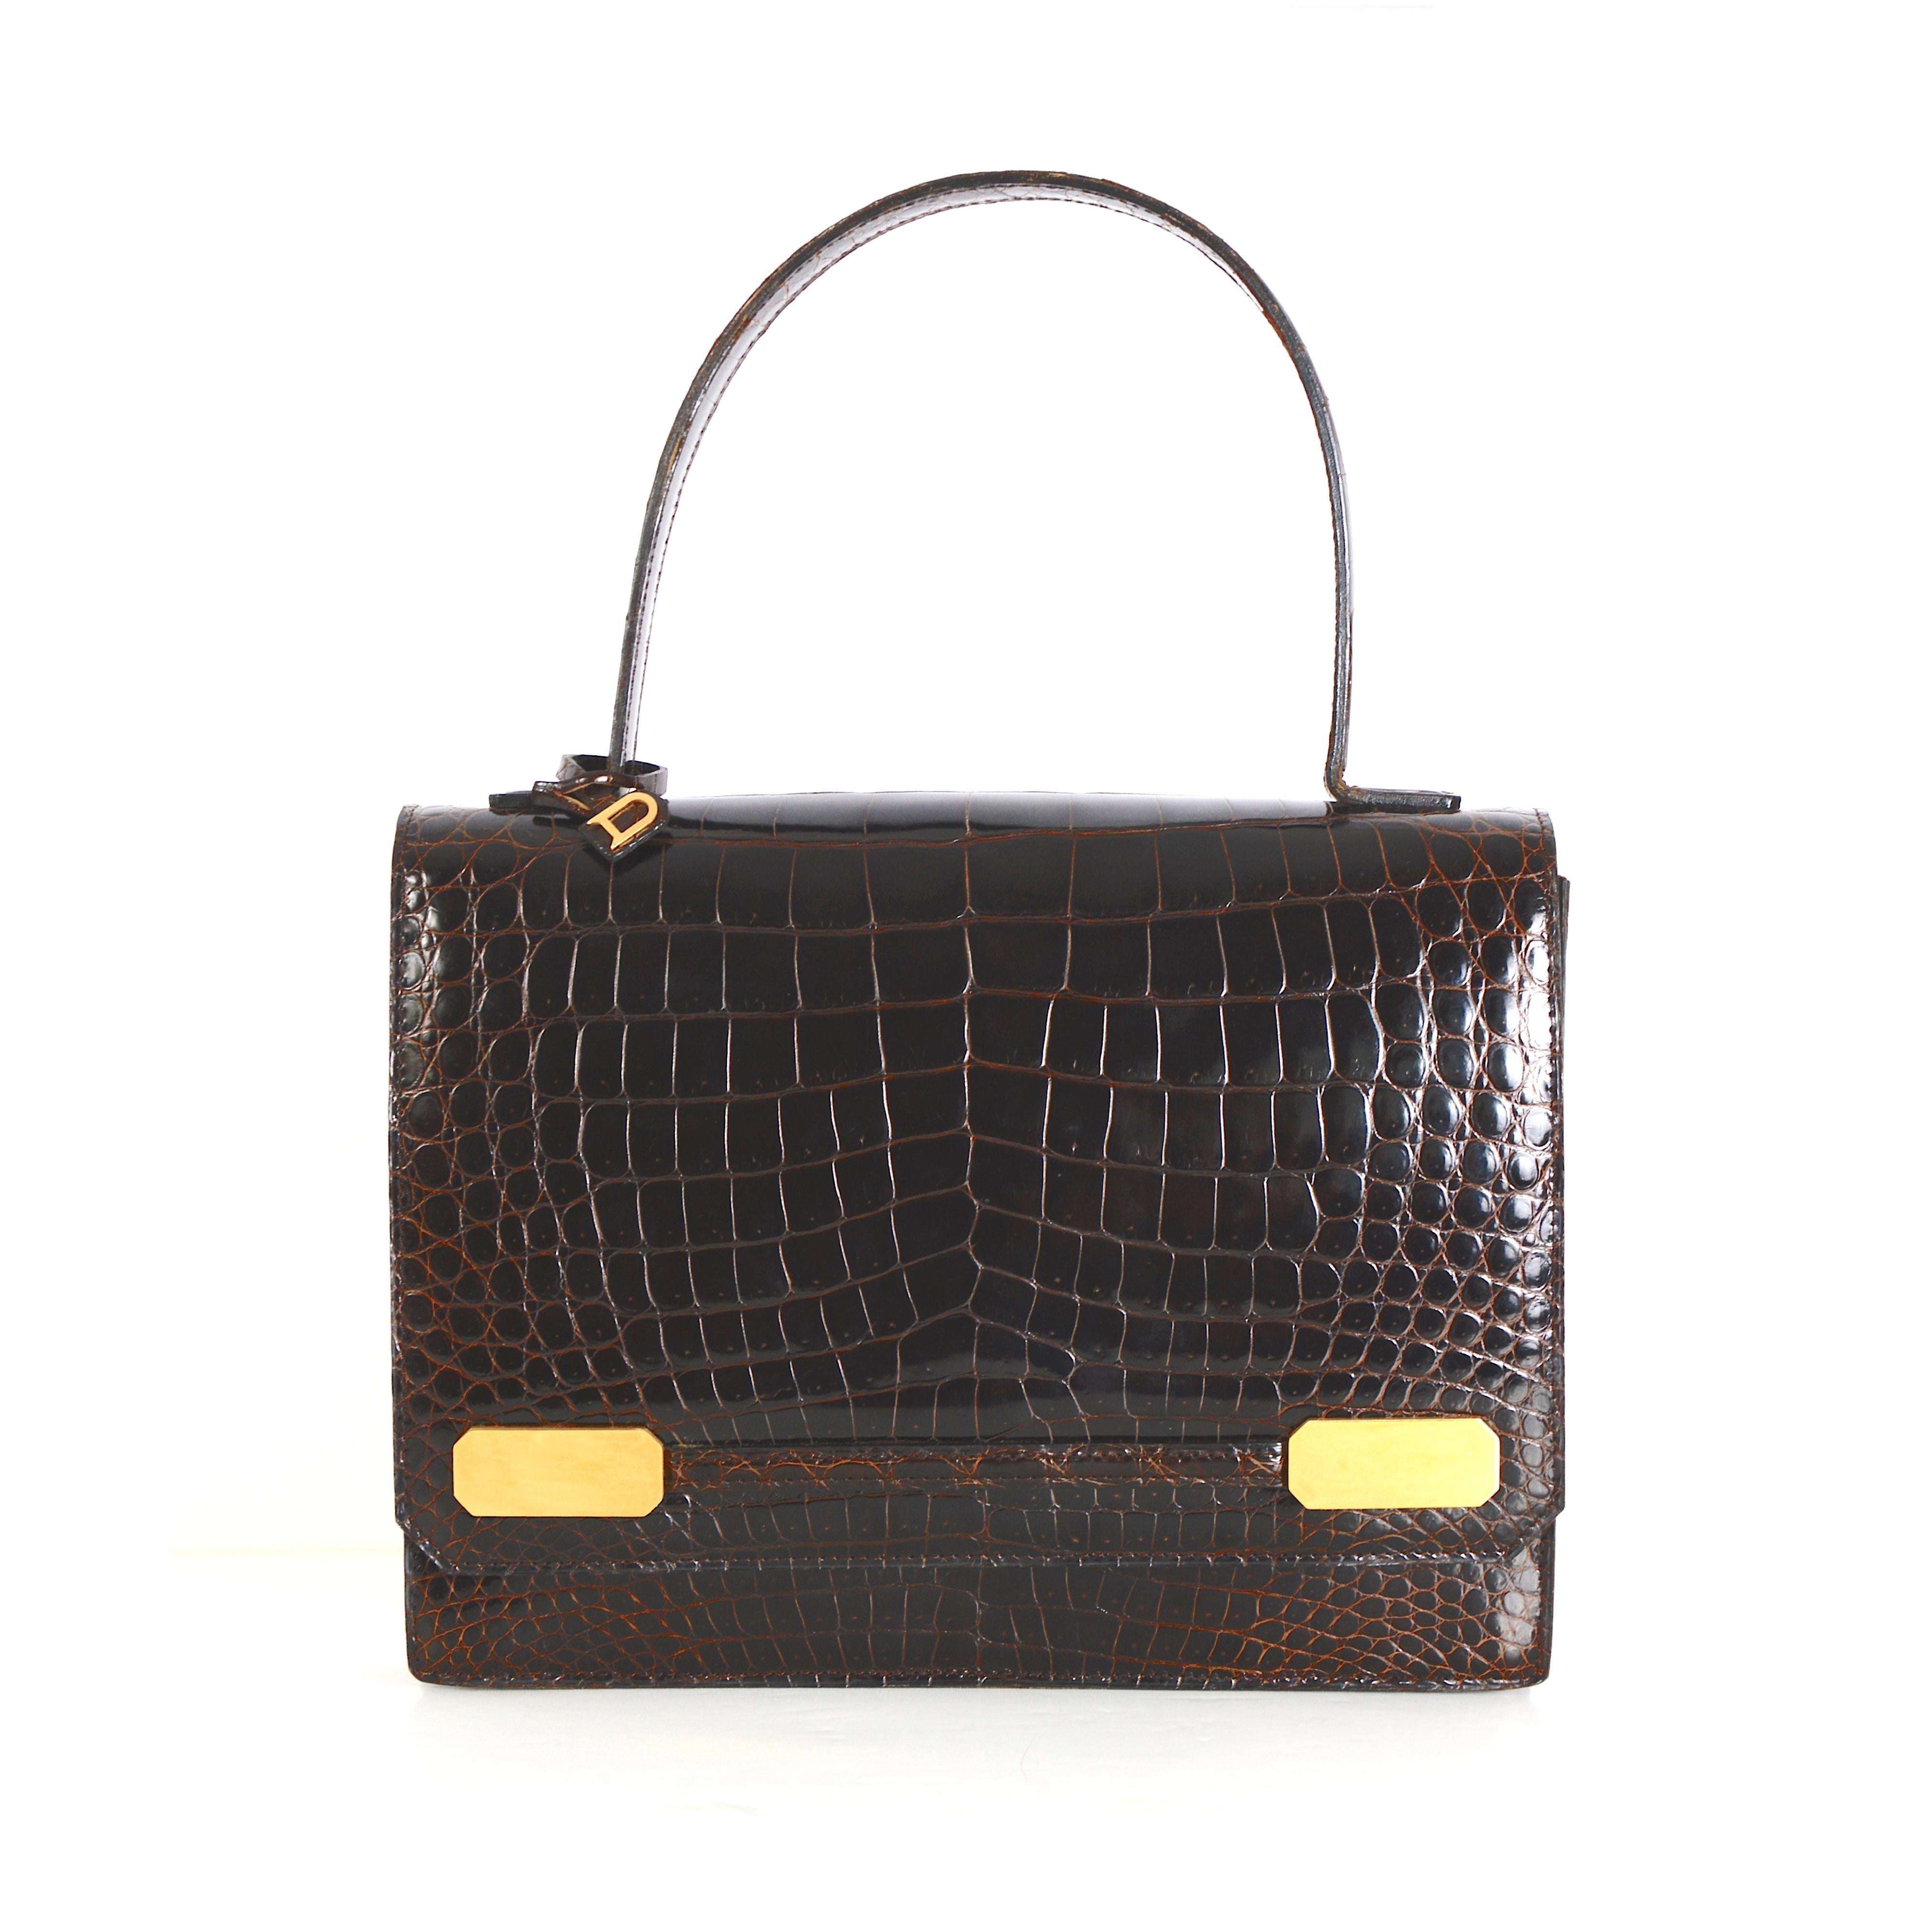 We are introducing this truly exceptional 1980s investment vintage Delvaux top-handle brown croco bag

Indulge in the timeless elegance of this extraordinary Delvaux design, a genuine vintage gem from the 1980s. Crafted with the utmost care, this